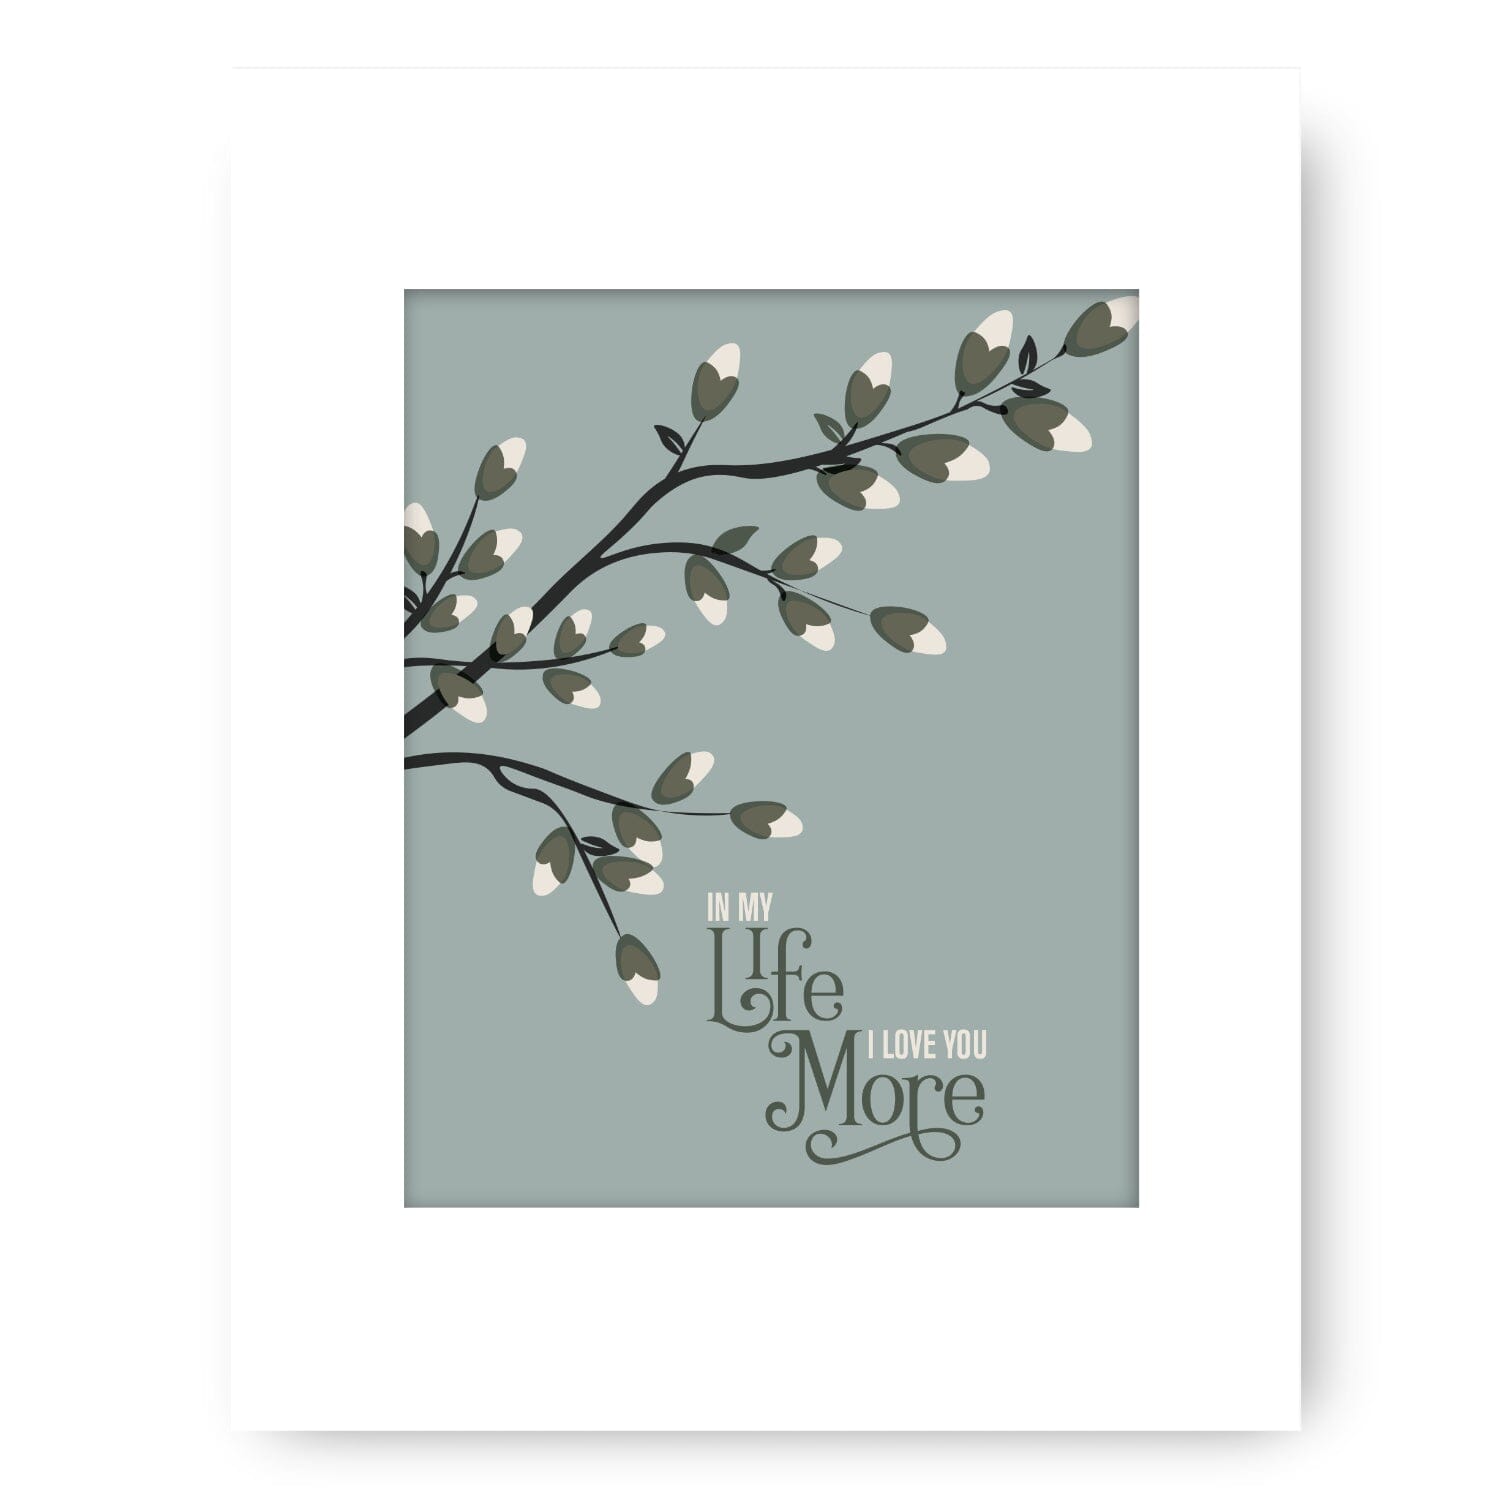 In My Life by the Beatles - Music Print Song Lyric Art Song Lyrics Art Song Lyrics Art 8x10 White Matted Print 